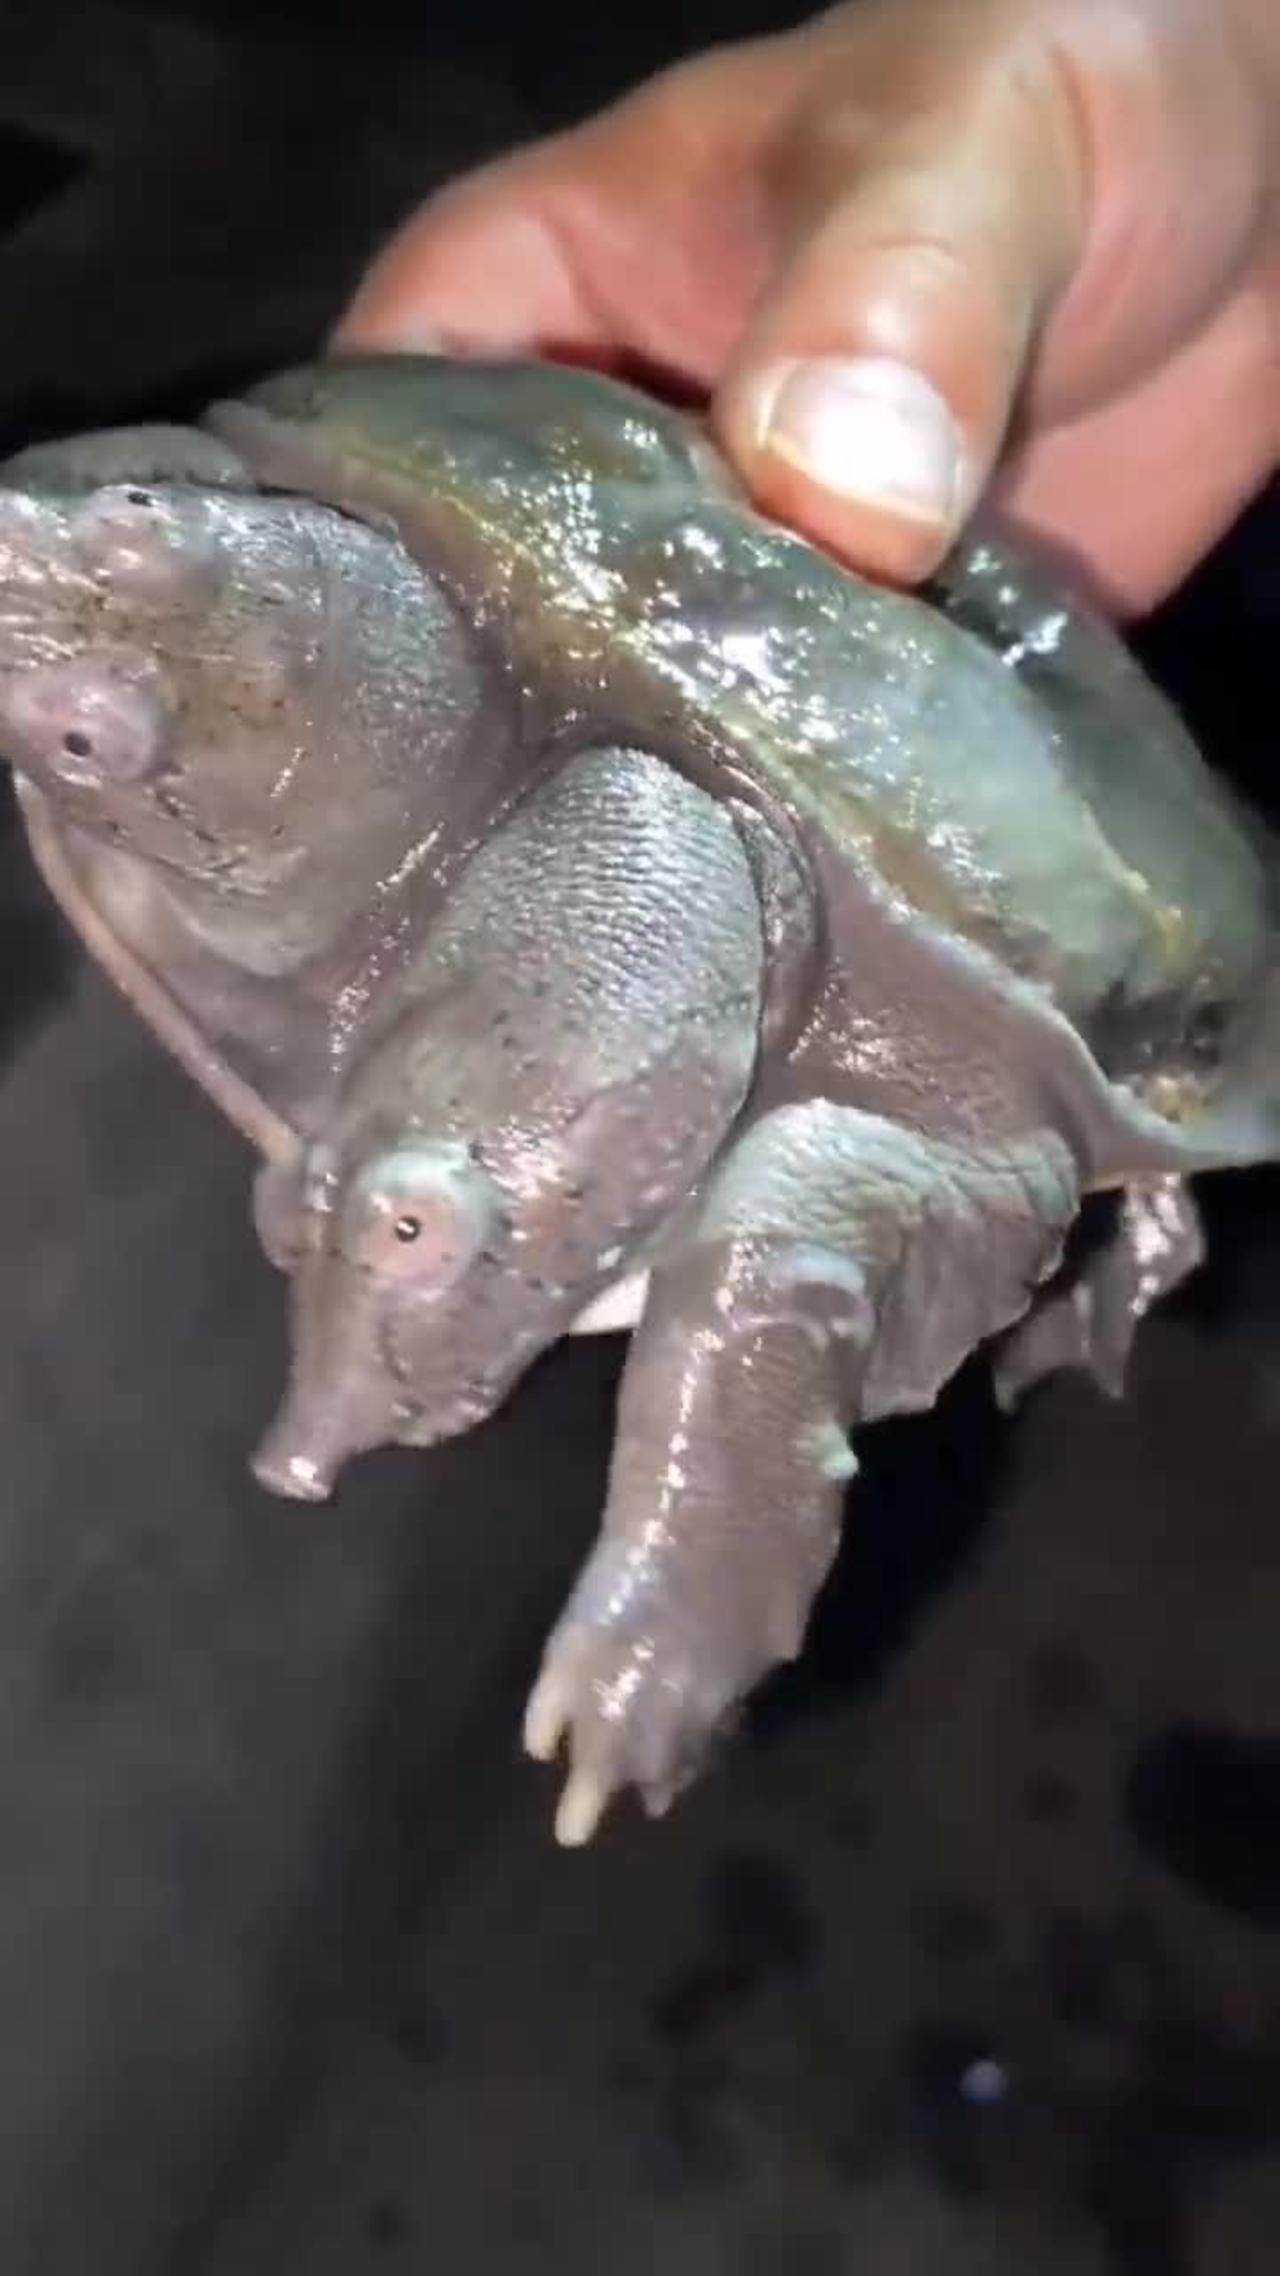 First time I saw a two-headed turtle